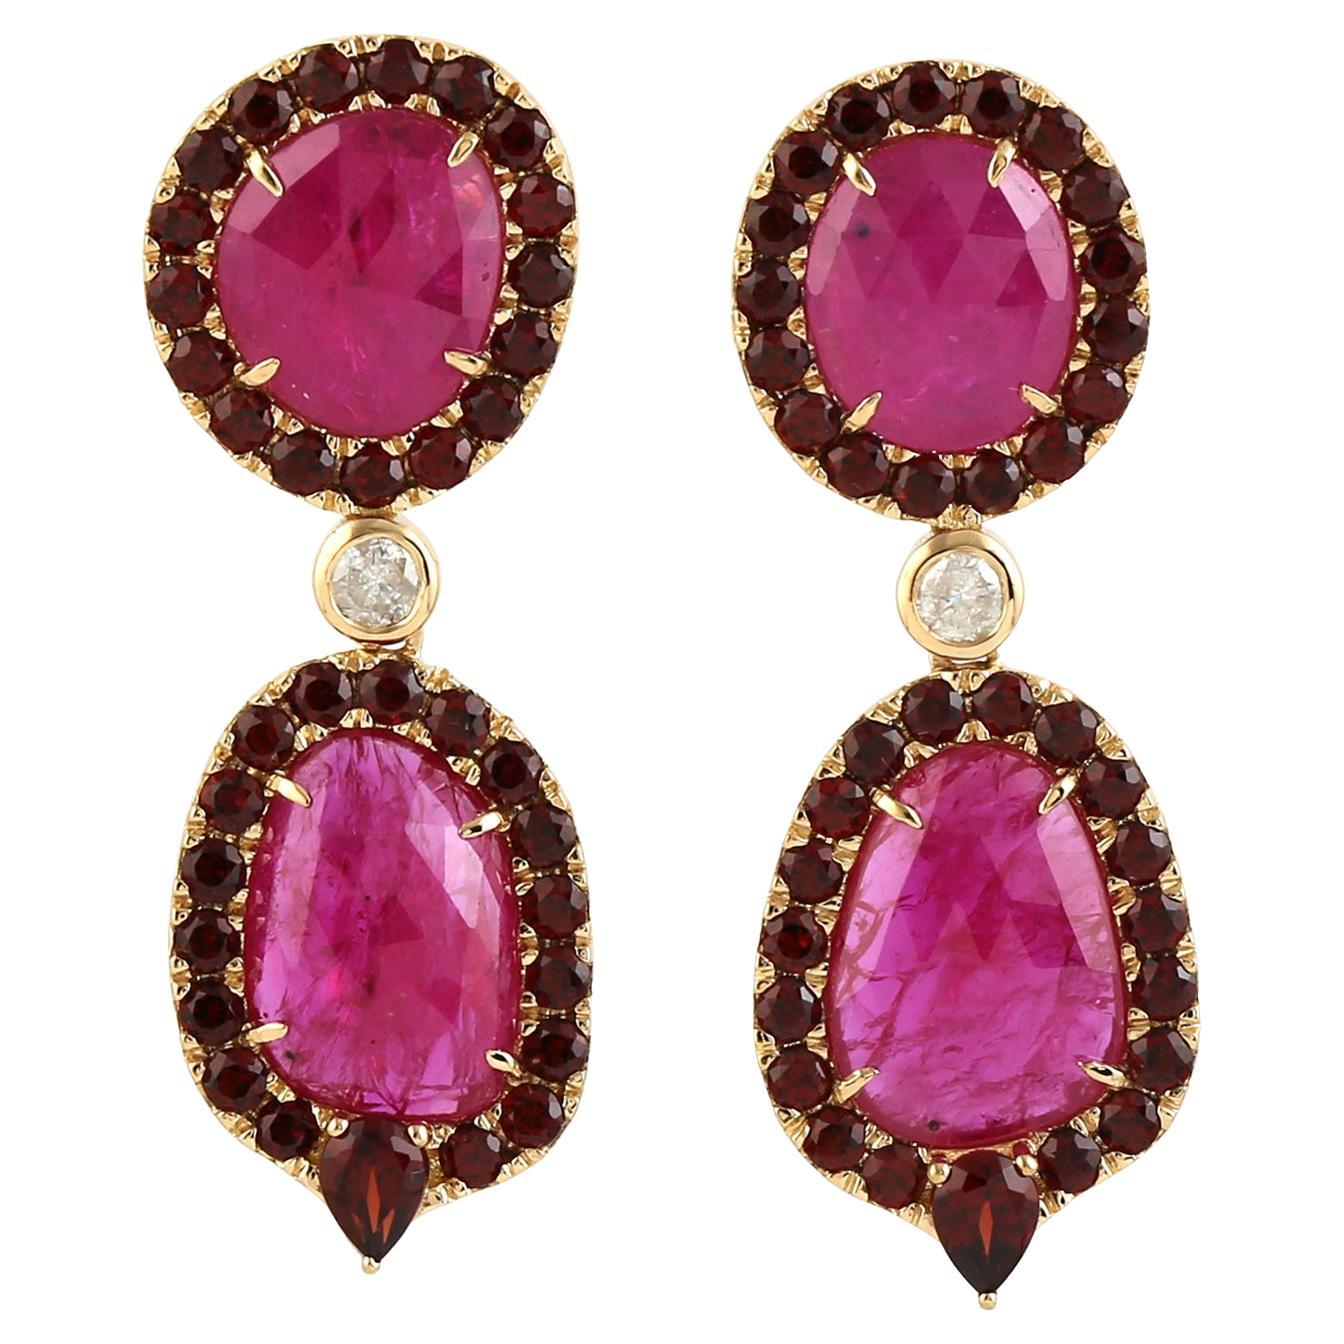 Two Tier Mosambic Ruby Dangle Earrings With Garnet Made in 18k Yellow Gold For Sale